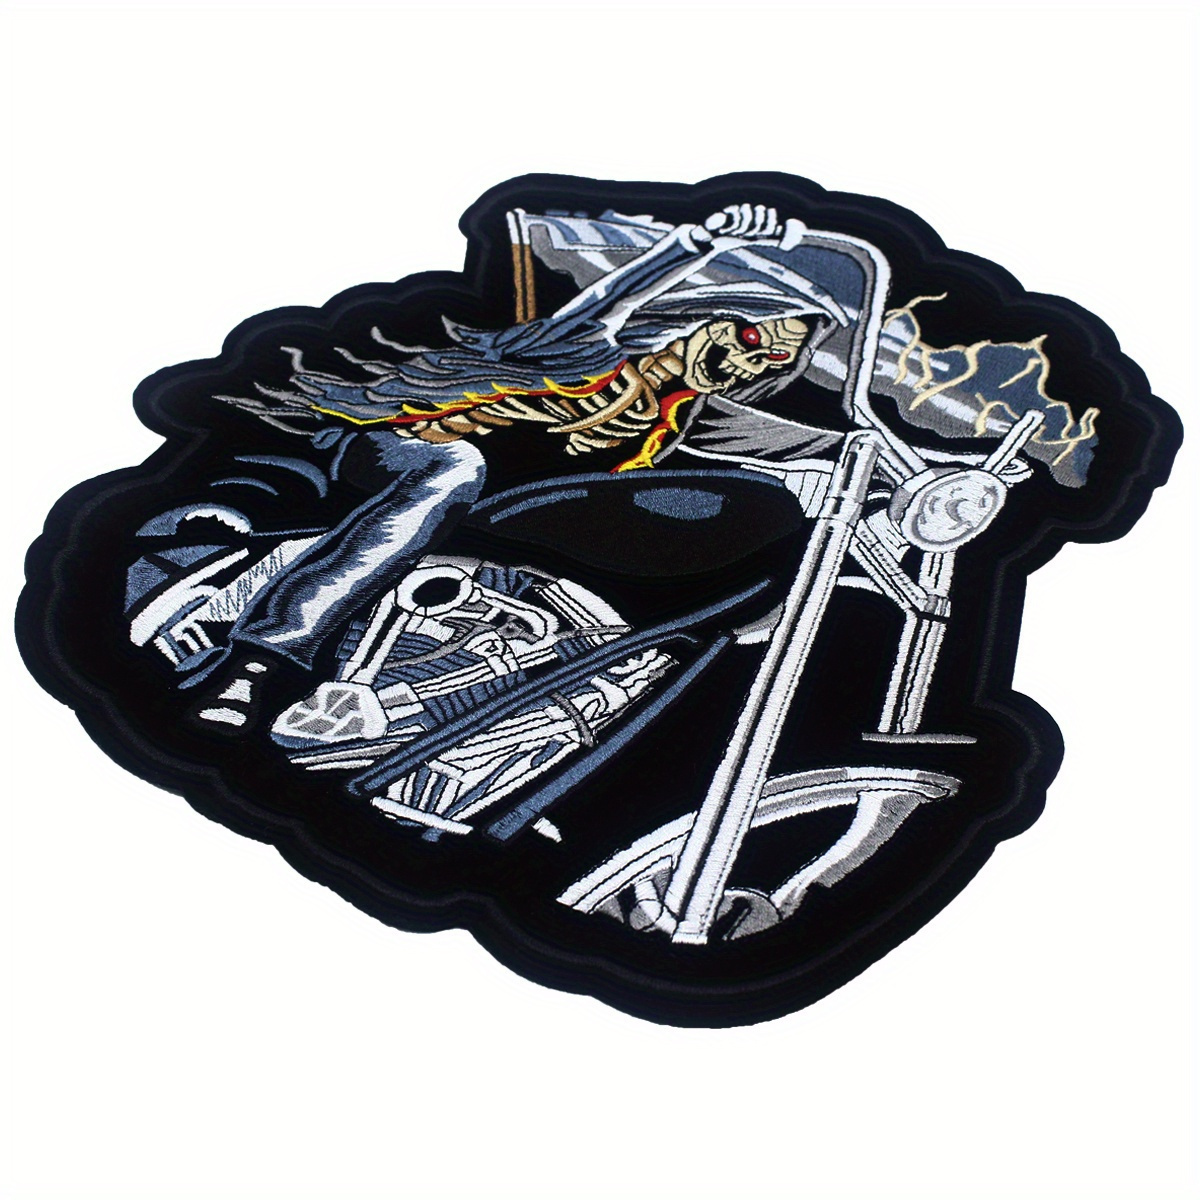 Skull Motorcycle Large Patch Jacket Badge Punk Rock Embroidered